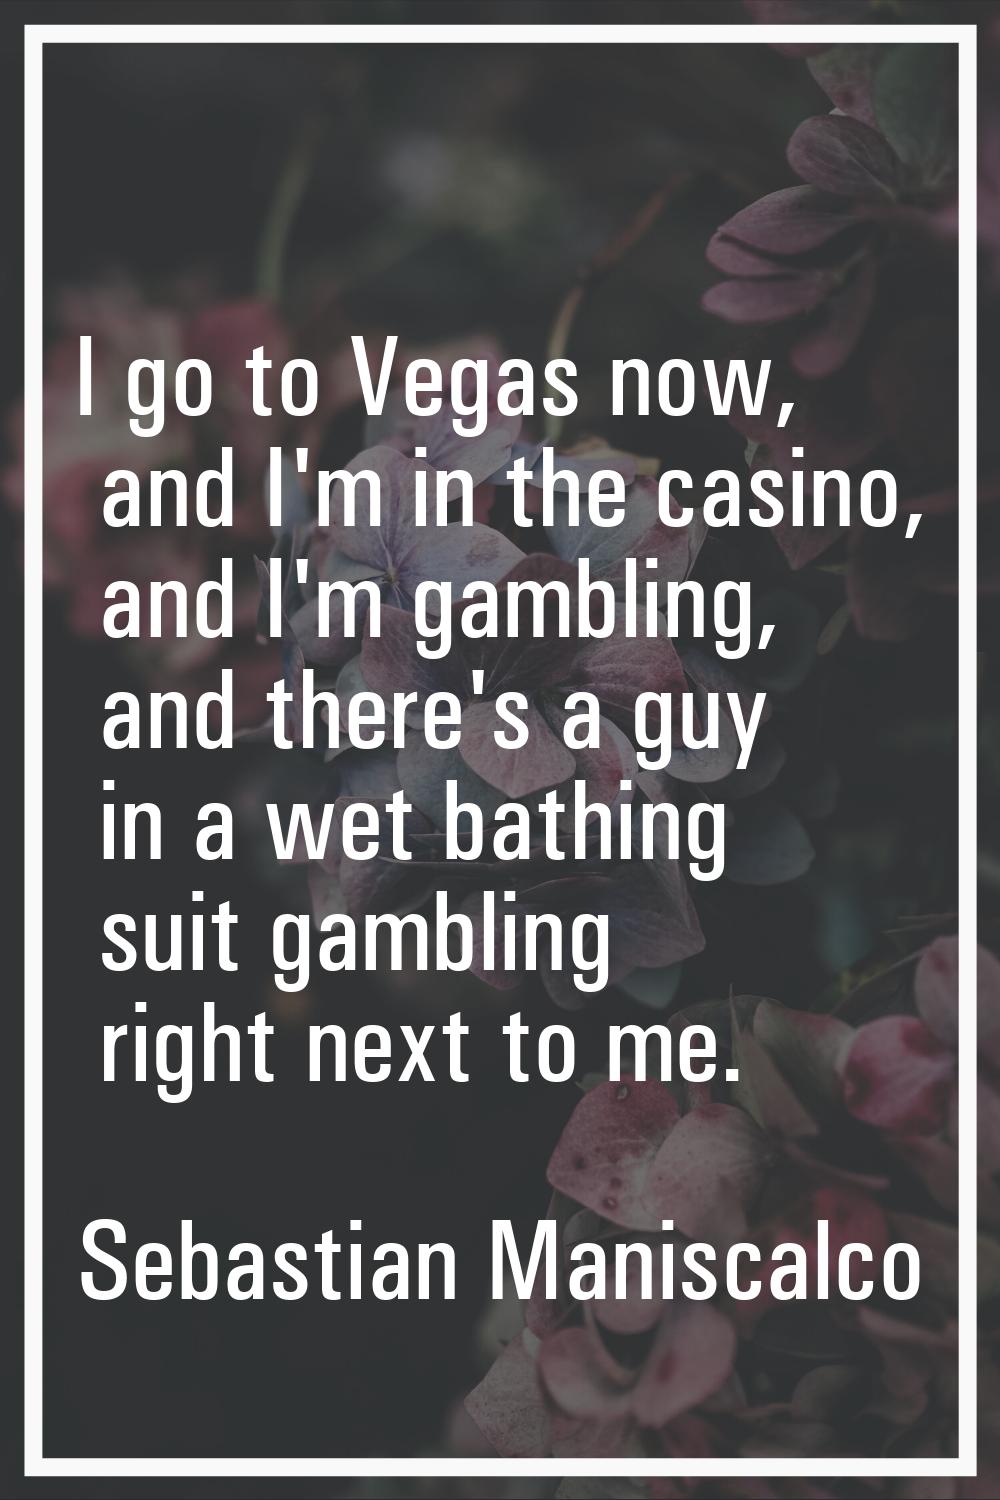 I go to Vegas now, and I'm in the casino, and I'm gambling, and there's a guy in a wet bathing suit